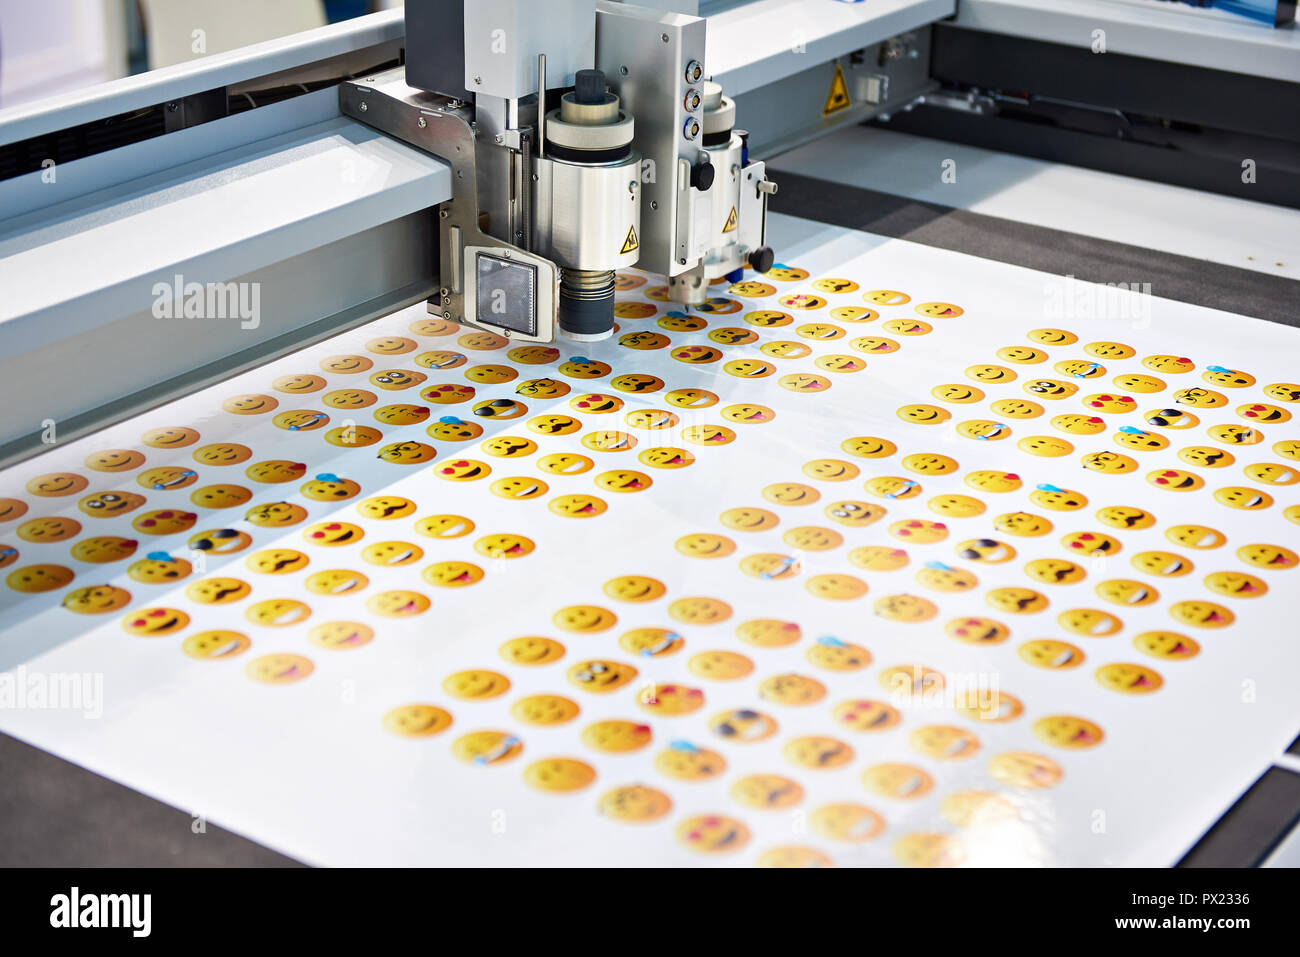 Working digital cutting plotter and yellow smileys Stock Photo